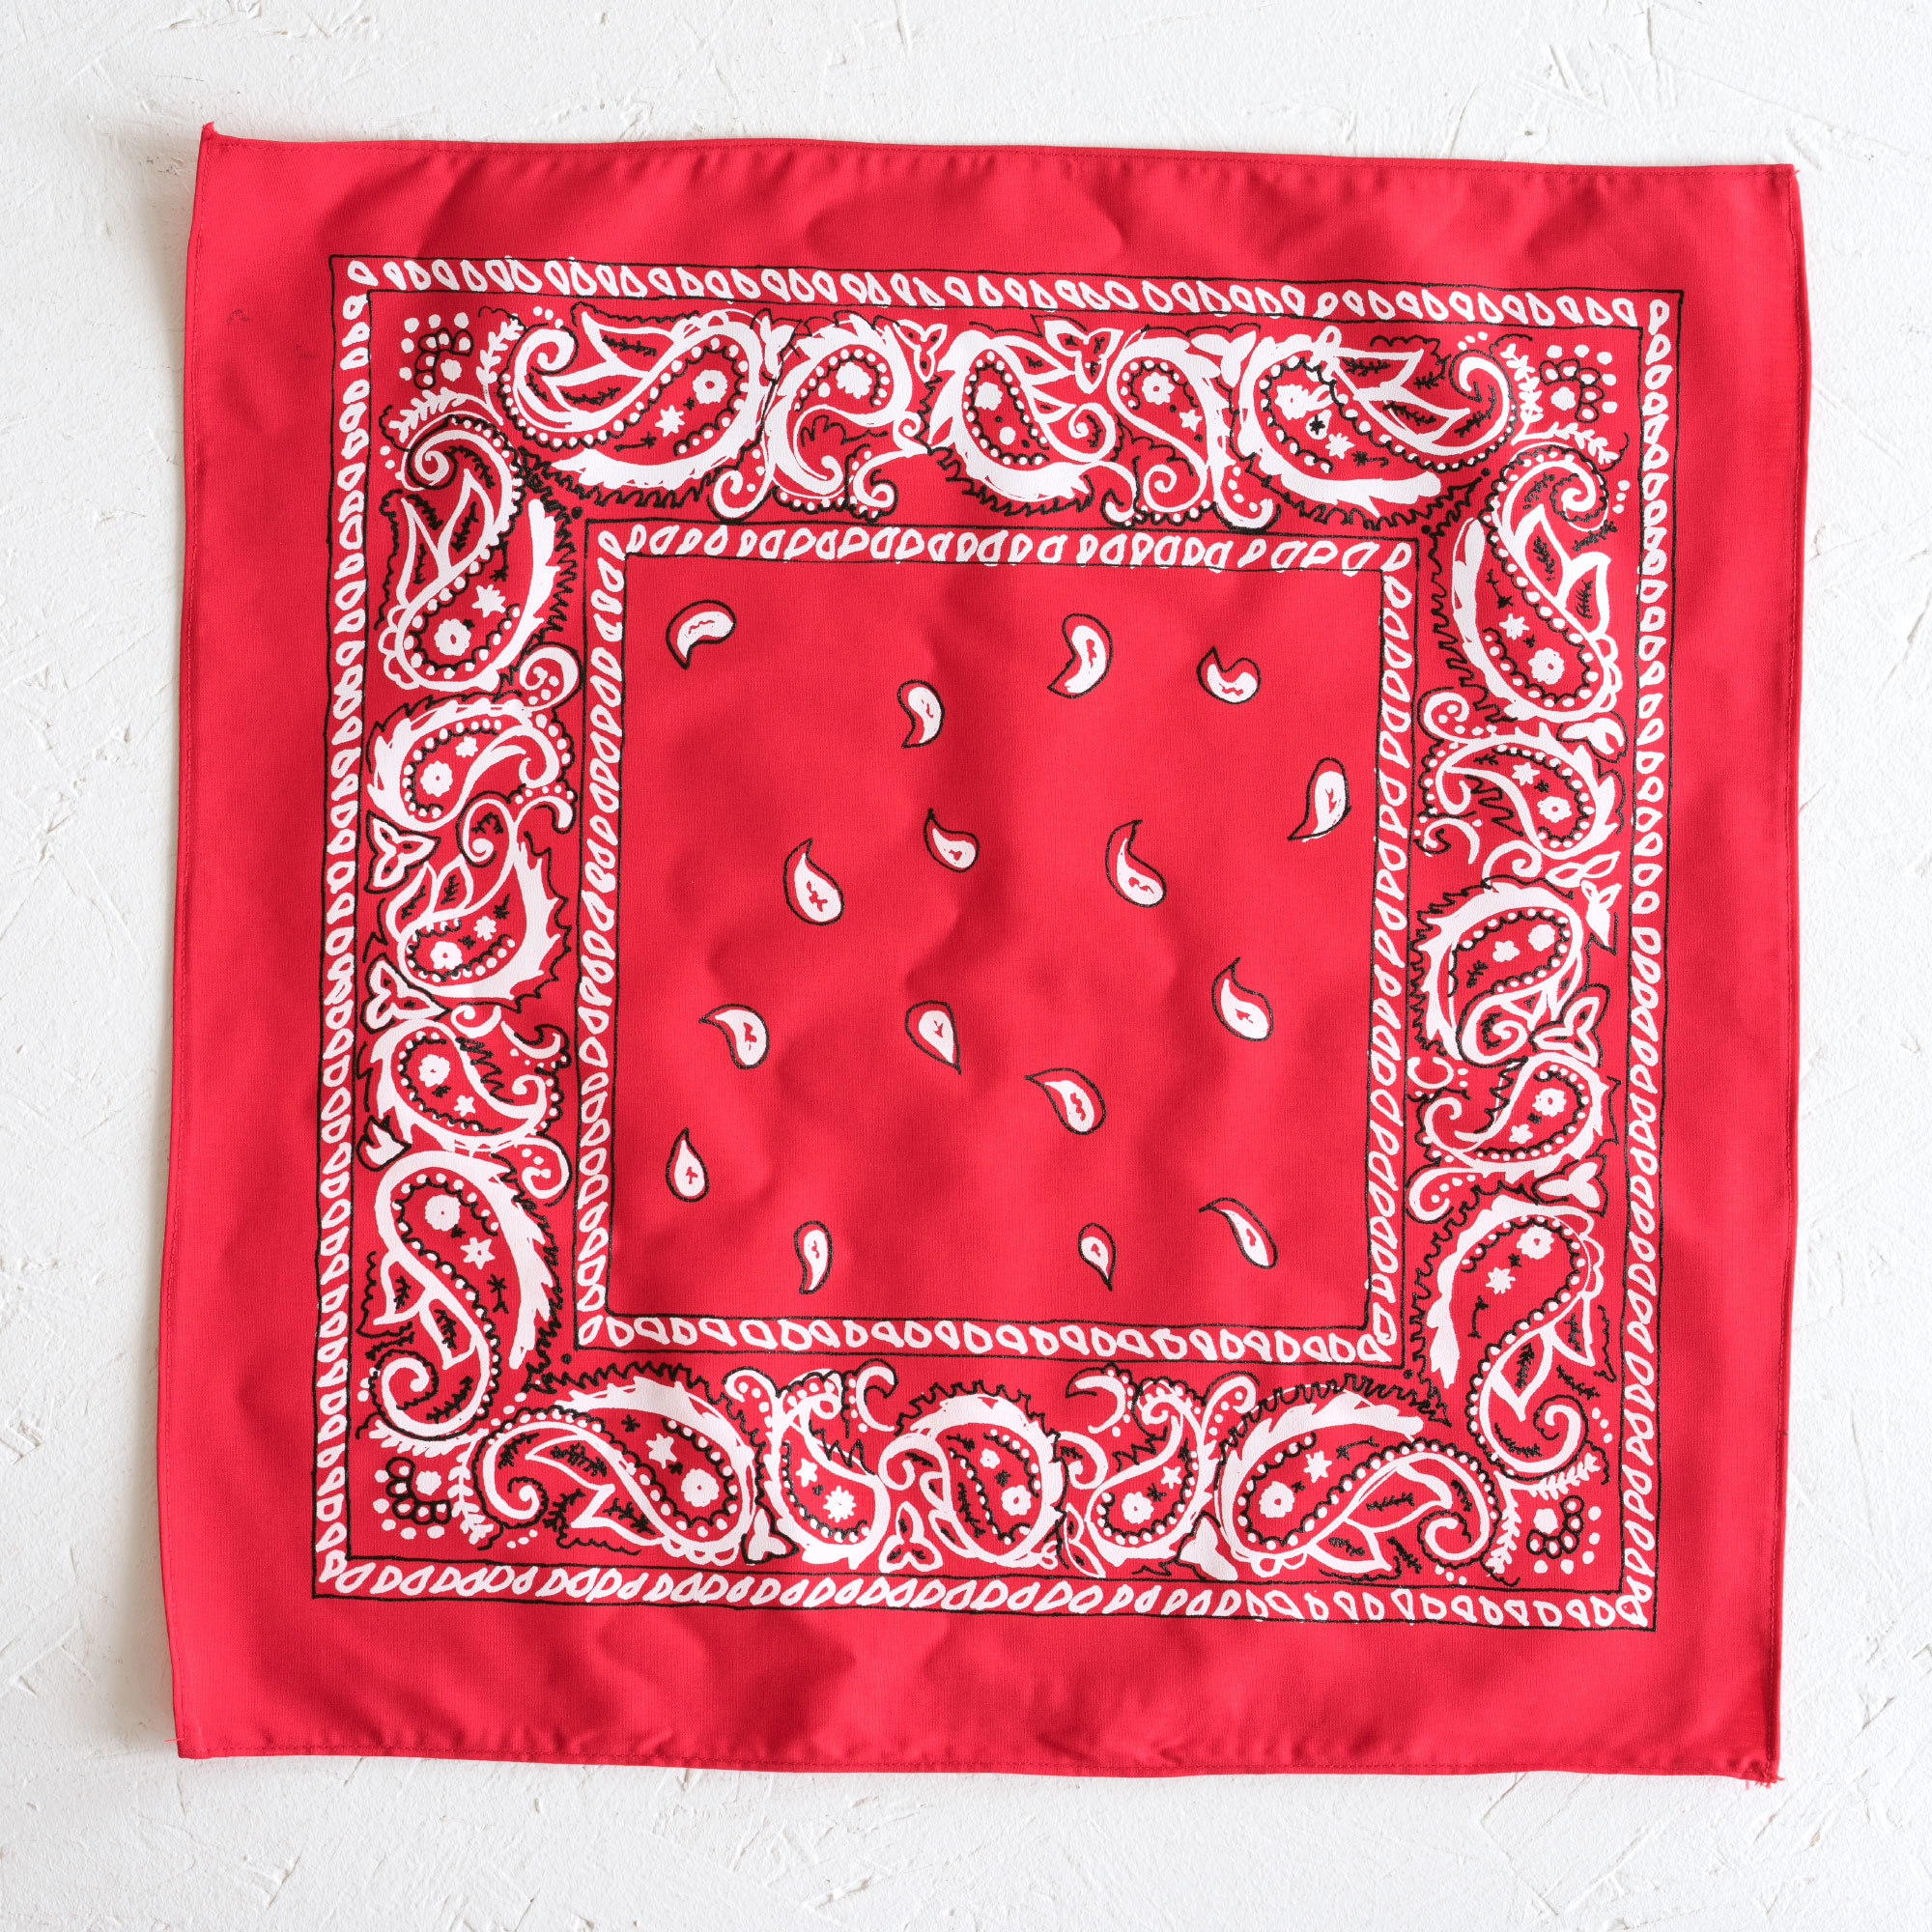 Nancy Davidson, *Hanky Code* (Red), 2016, Two color silkscreen on hand cut & sewn cotton, 17 x 17 inches (43.18 x 43.18 cm)